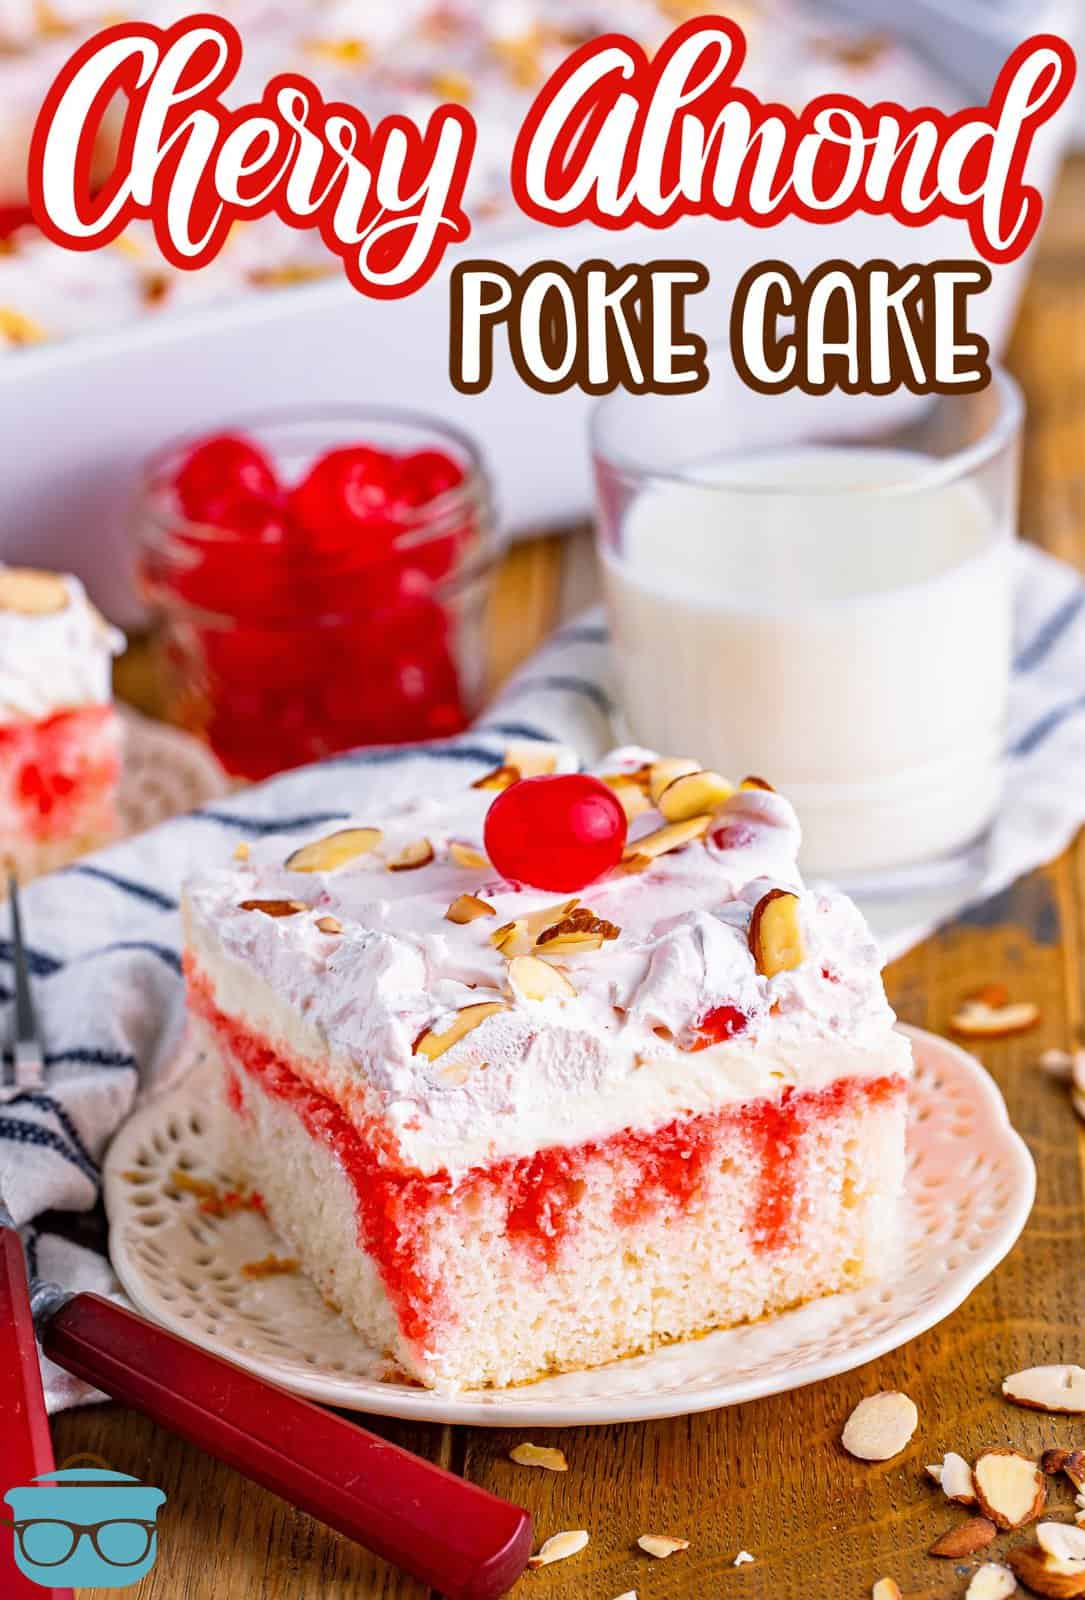 slice of Cherry Almond Poke Cake on a plate with a glass of milk shown in the background.